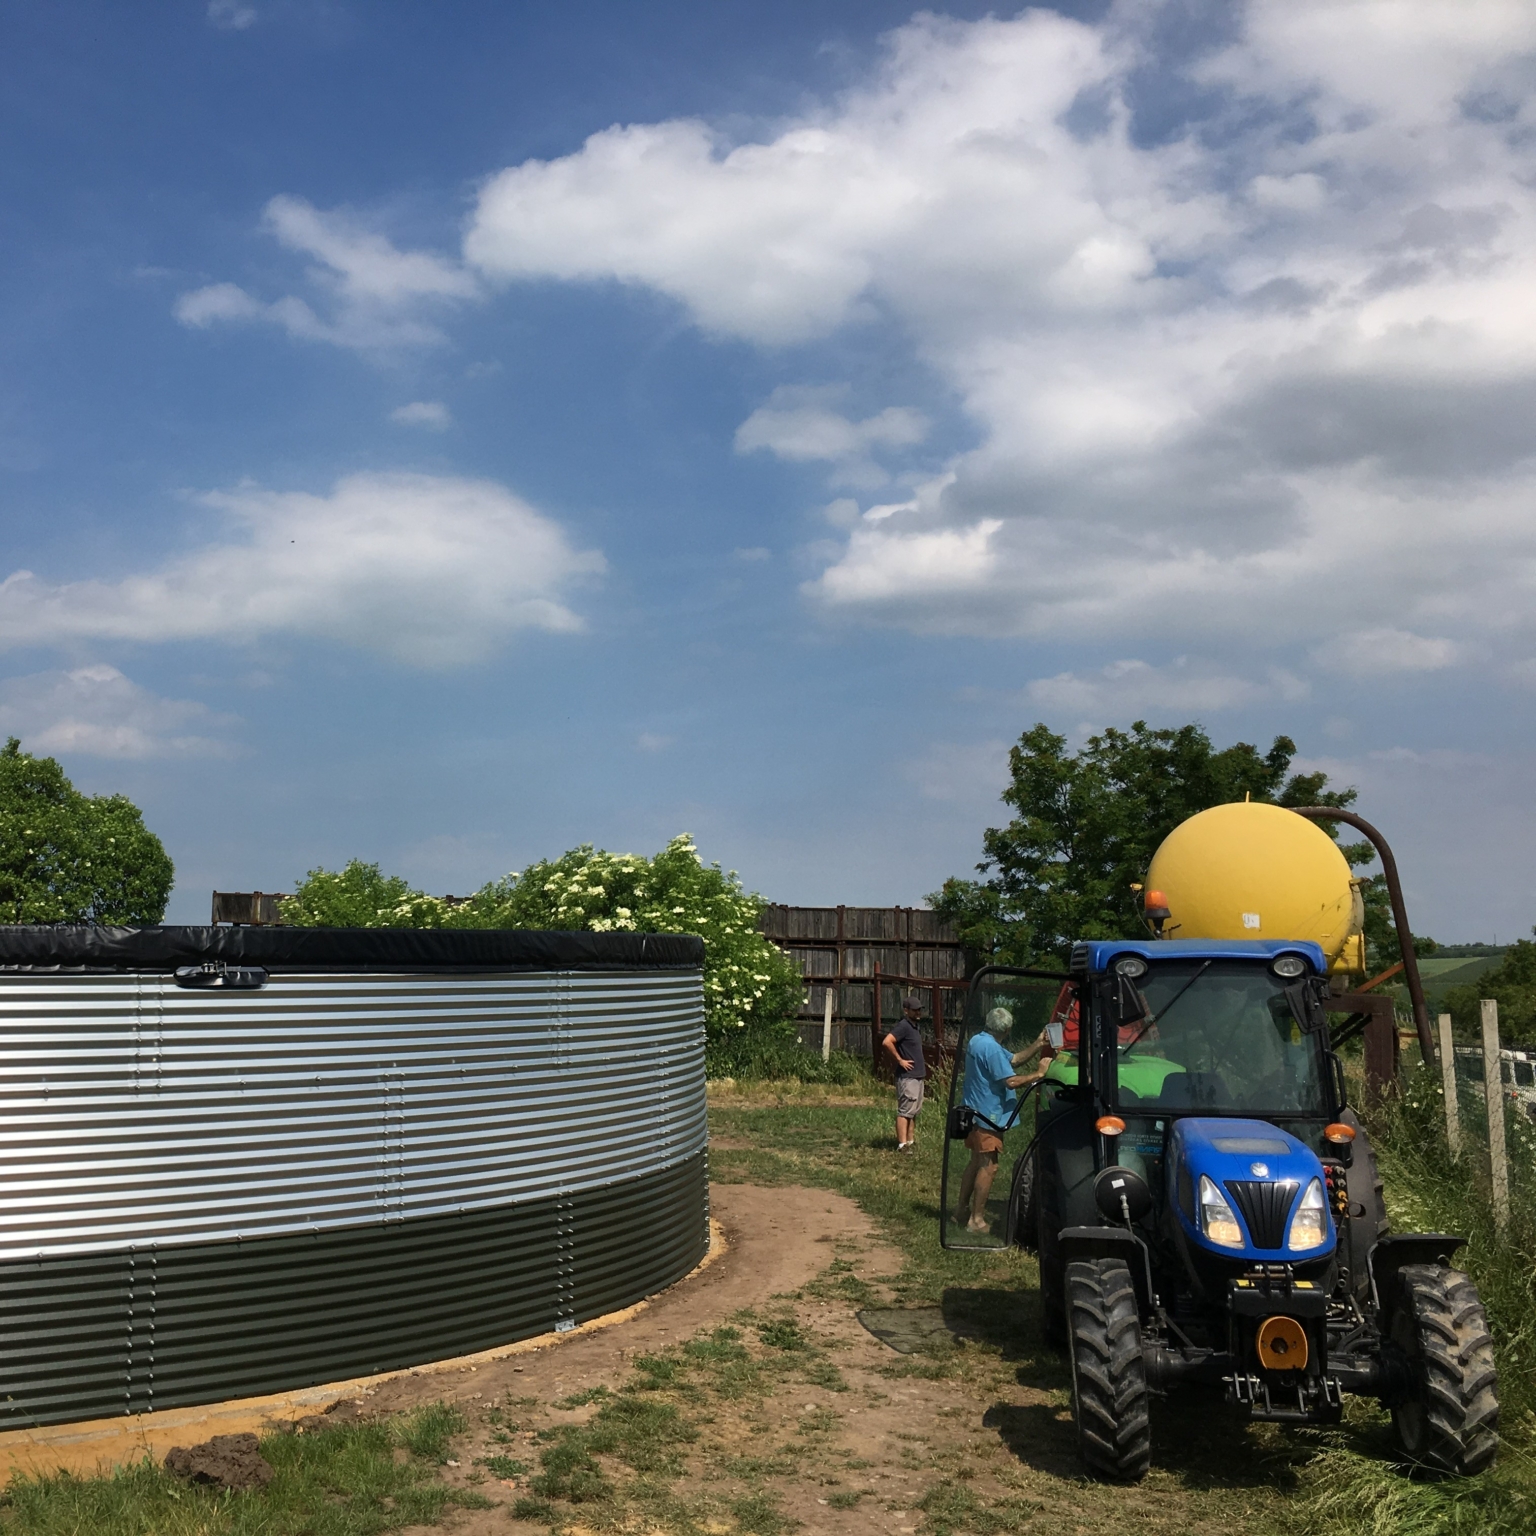 Corrugated steel silo with tractor